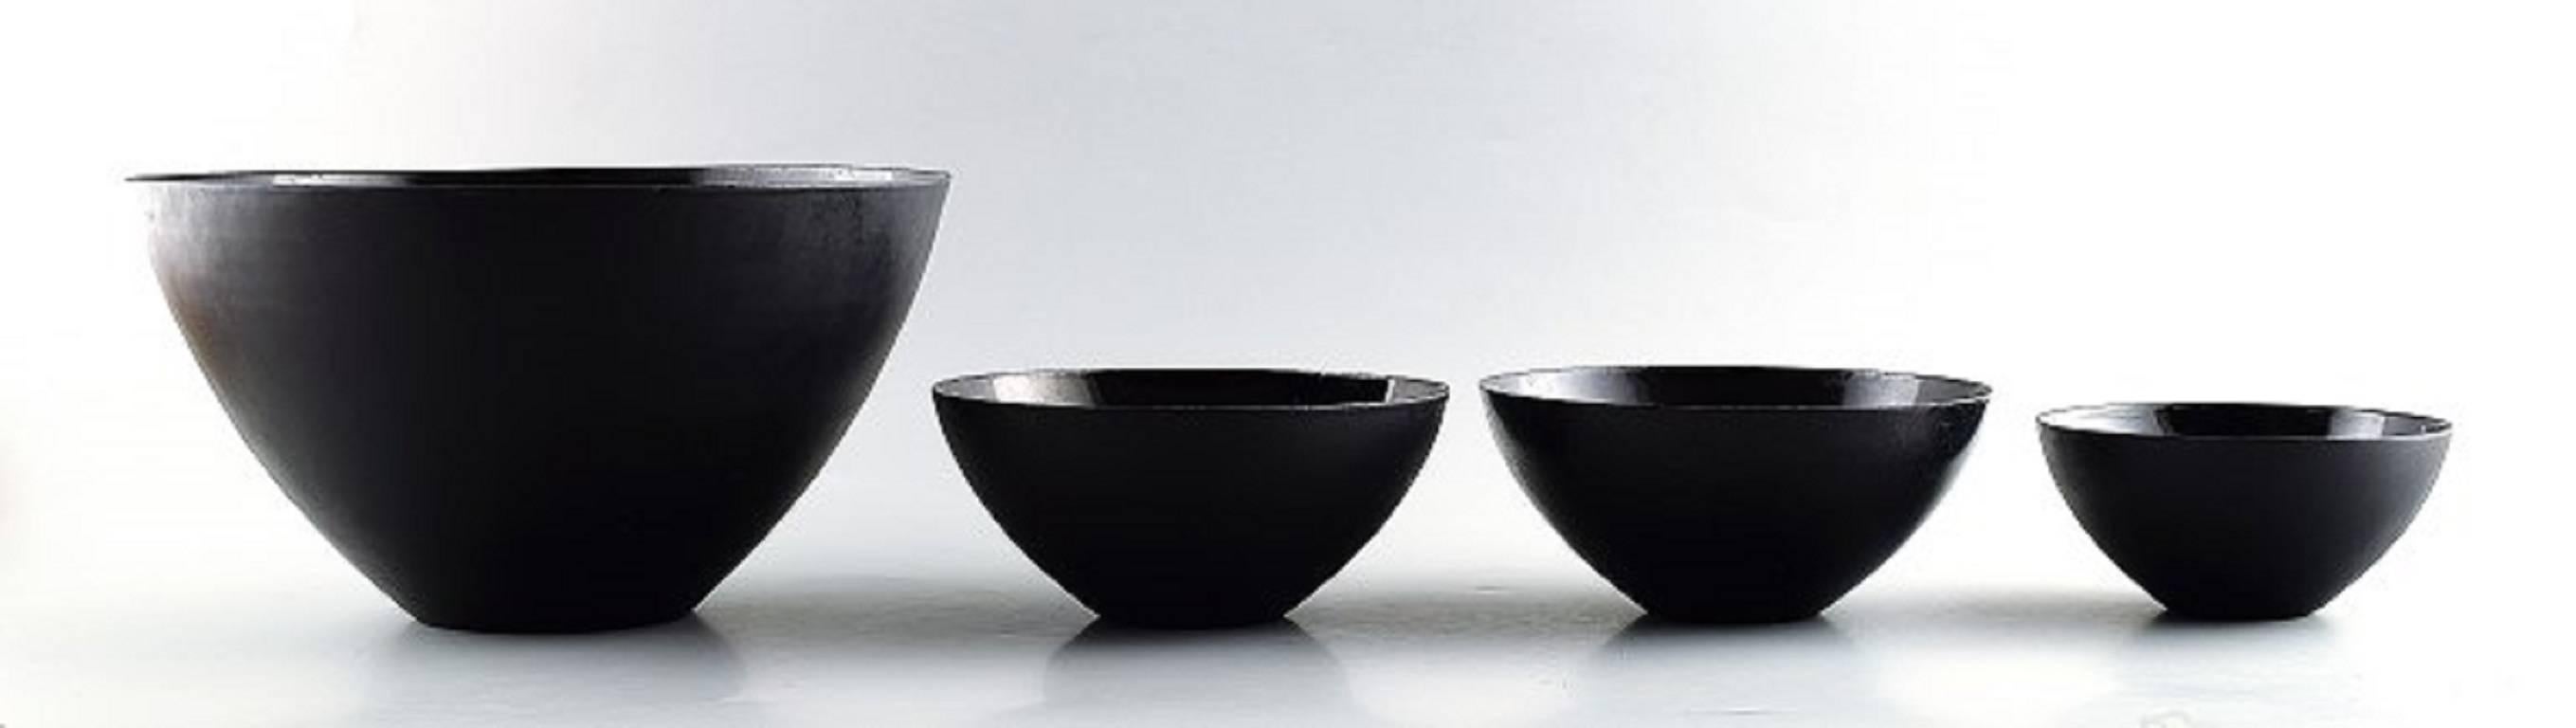 Four Krenit bowls by Herbert Krenchel. Black metal and black enamel,

1970s.

The bowls are measuring 25 cm and 16 cm and 12.5 cm in diameter.

In perfect condition.

Hallmarked. Krenit, Denmark.